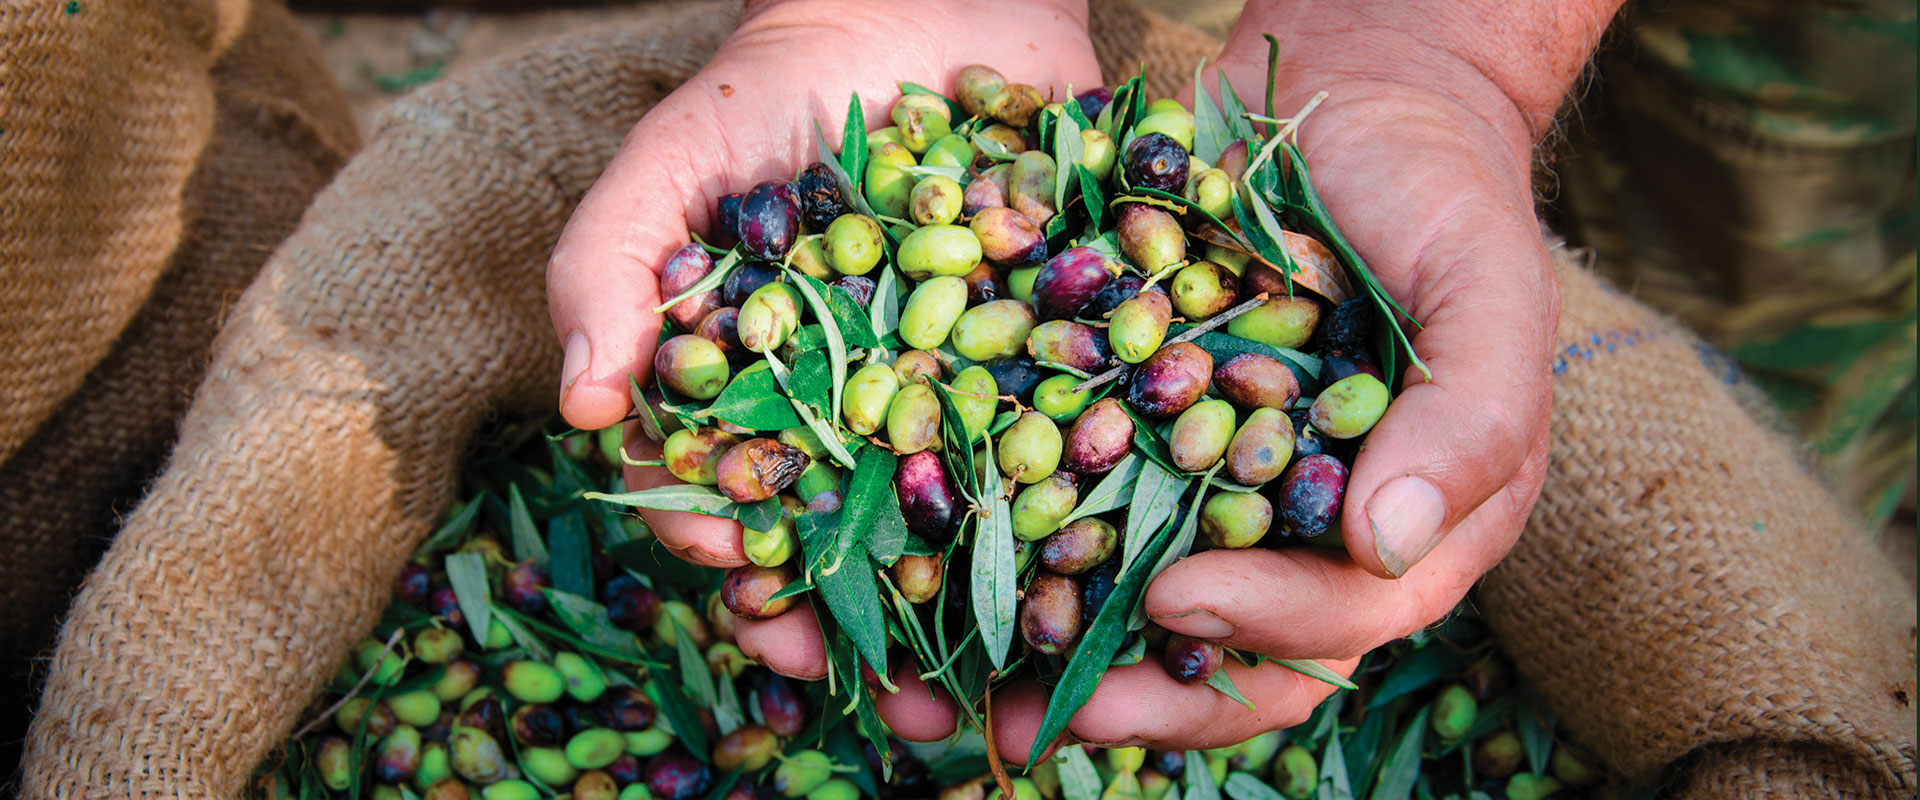 hands with varieties of olives